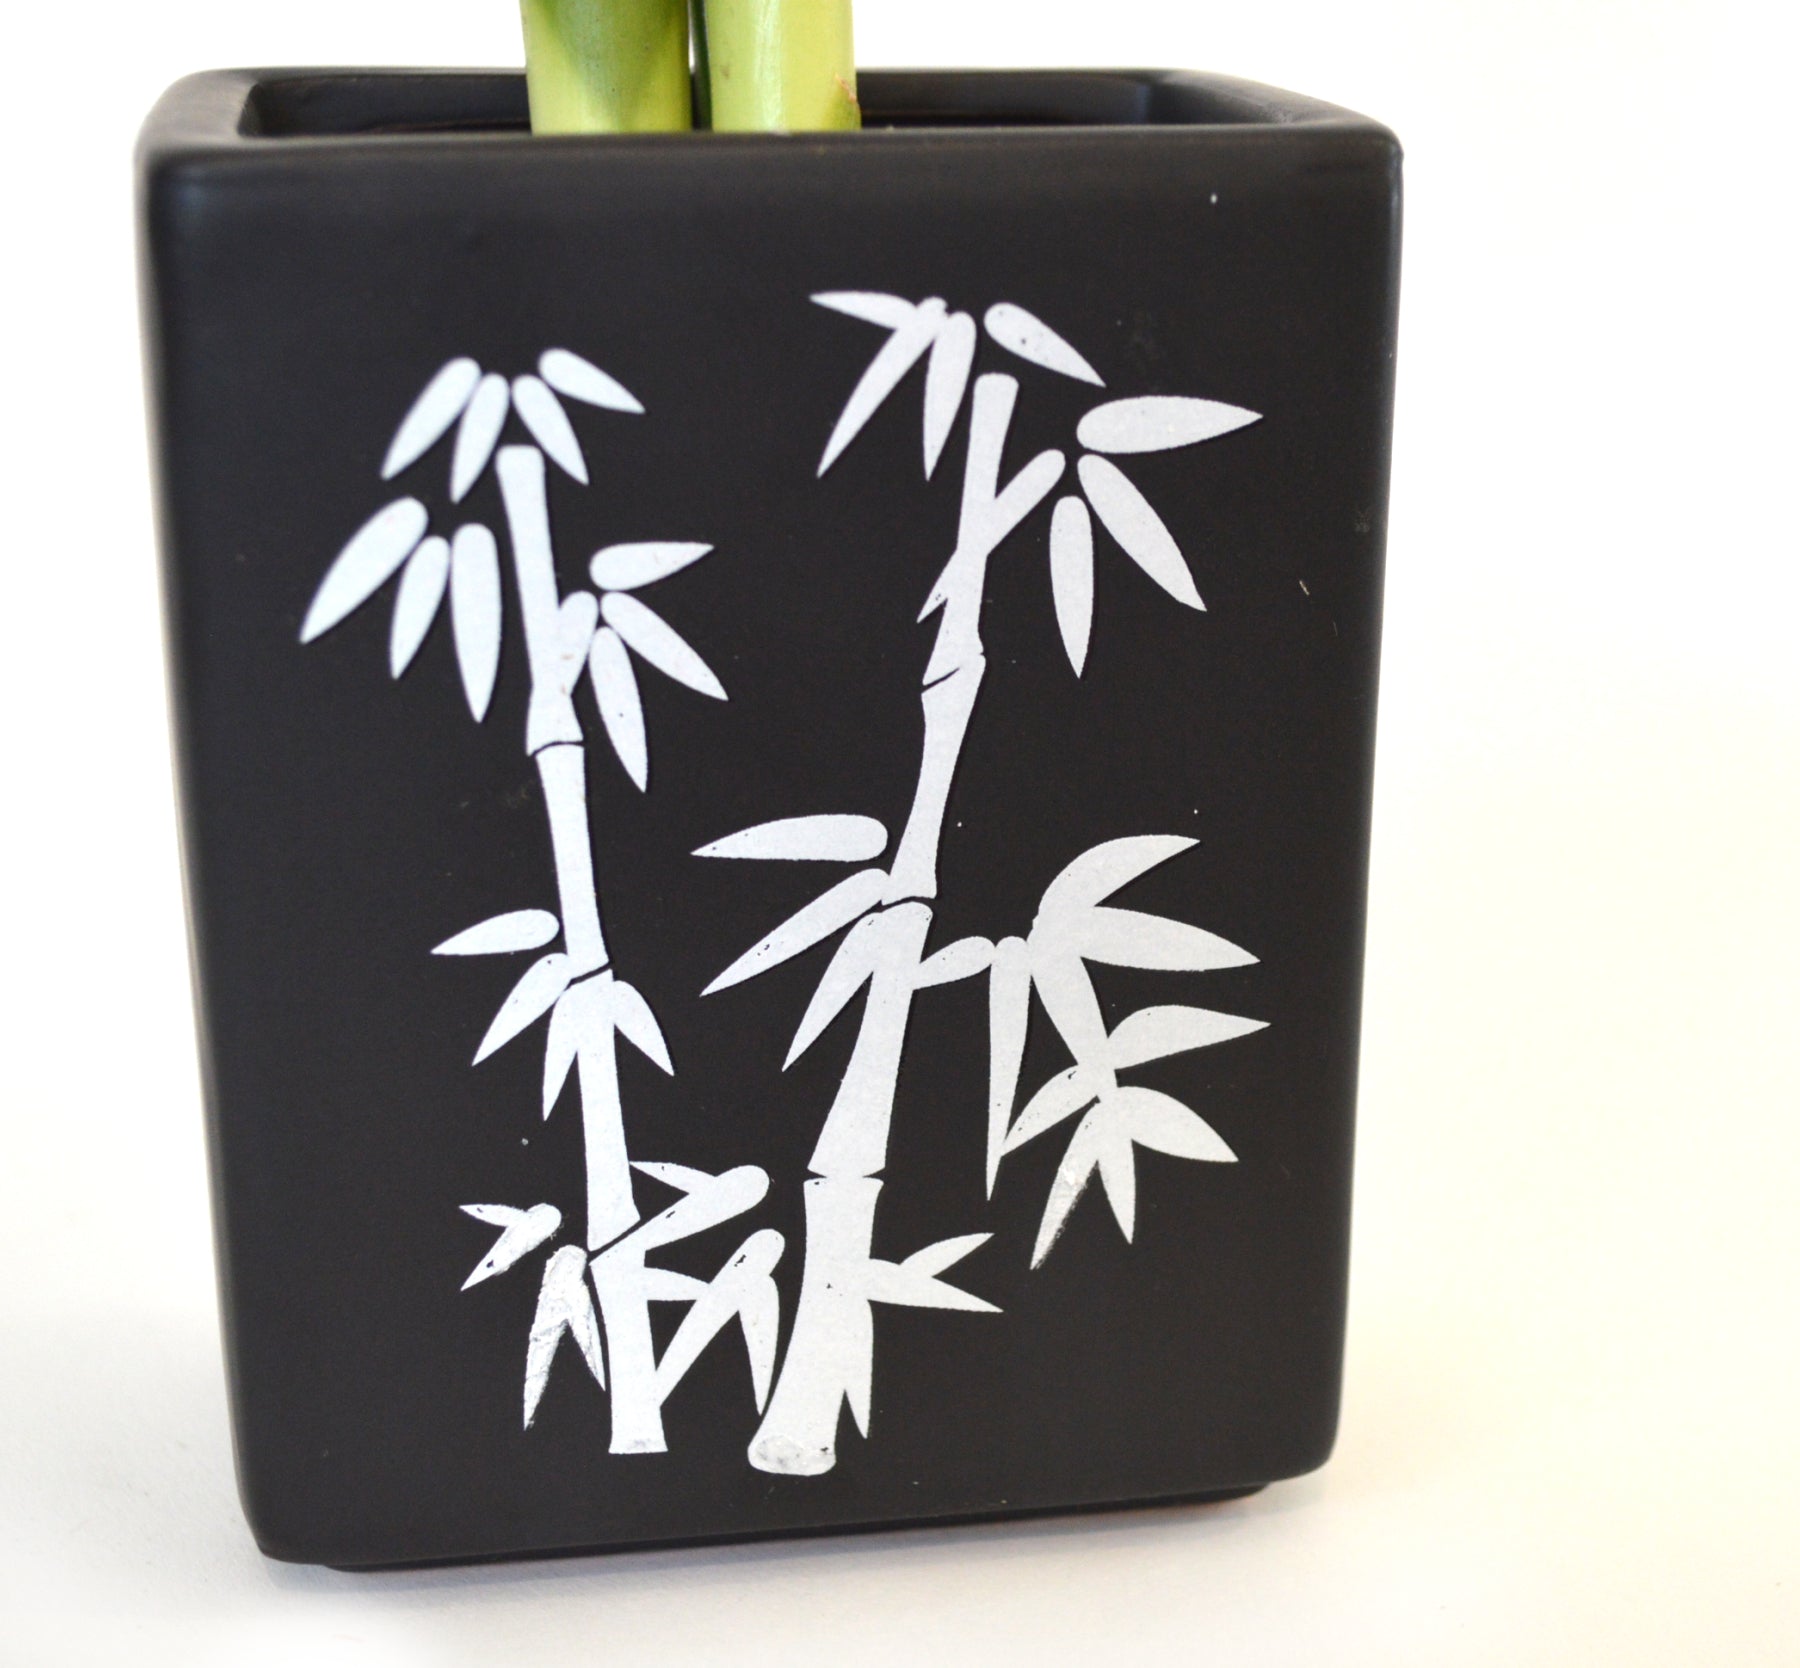 9GreenBox - Lucky Bamboo Spiral Style with Silk Flowers and Large Black Ceramic Vase - 9GreenBox